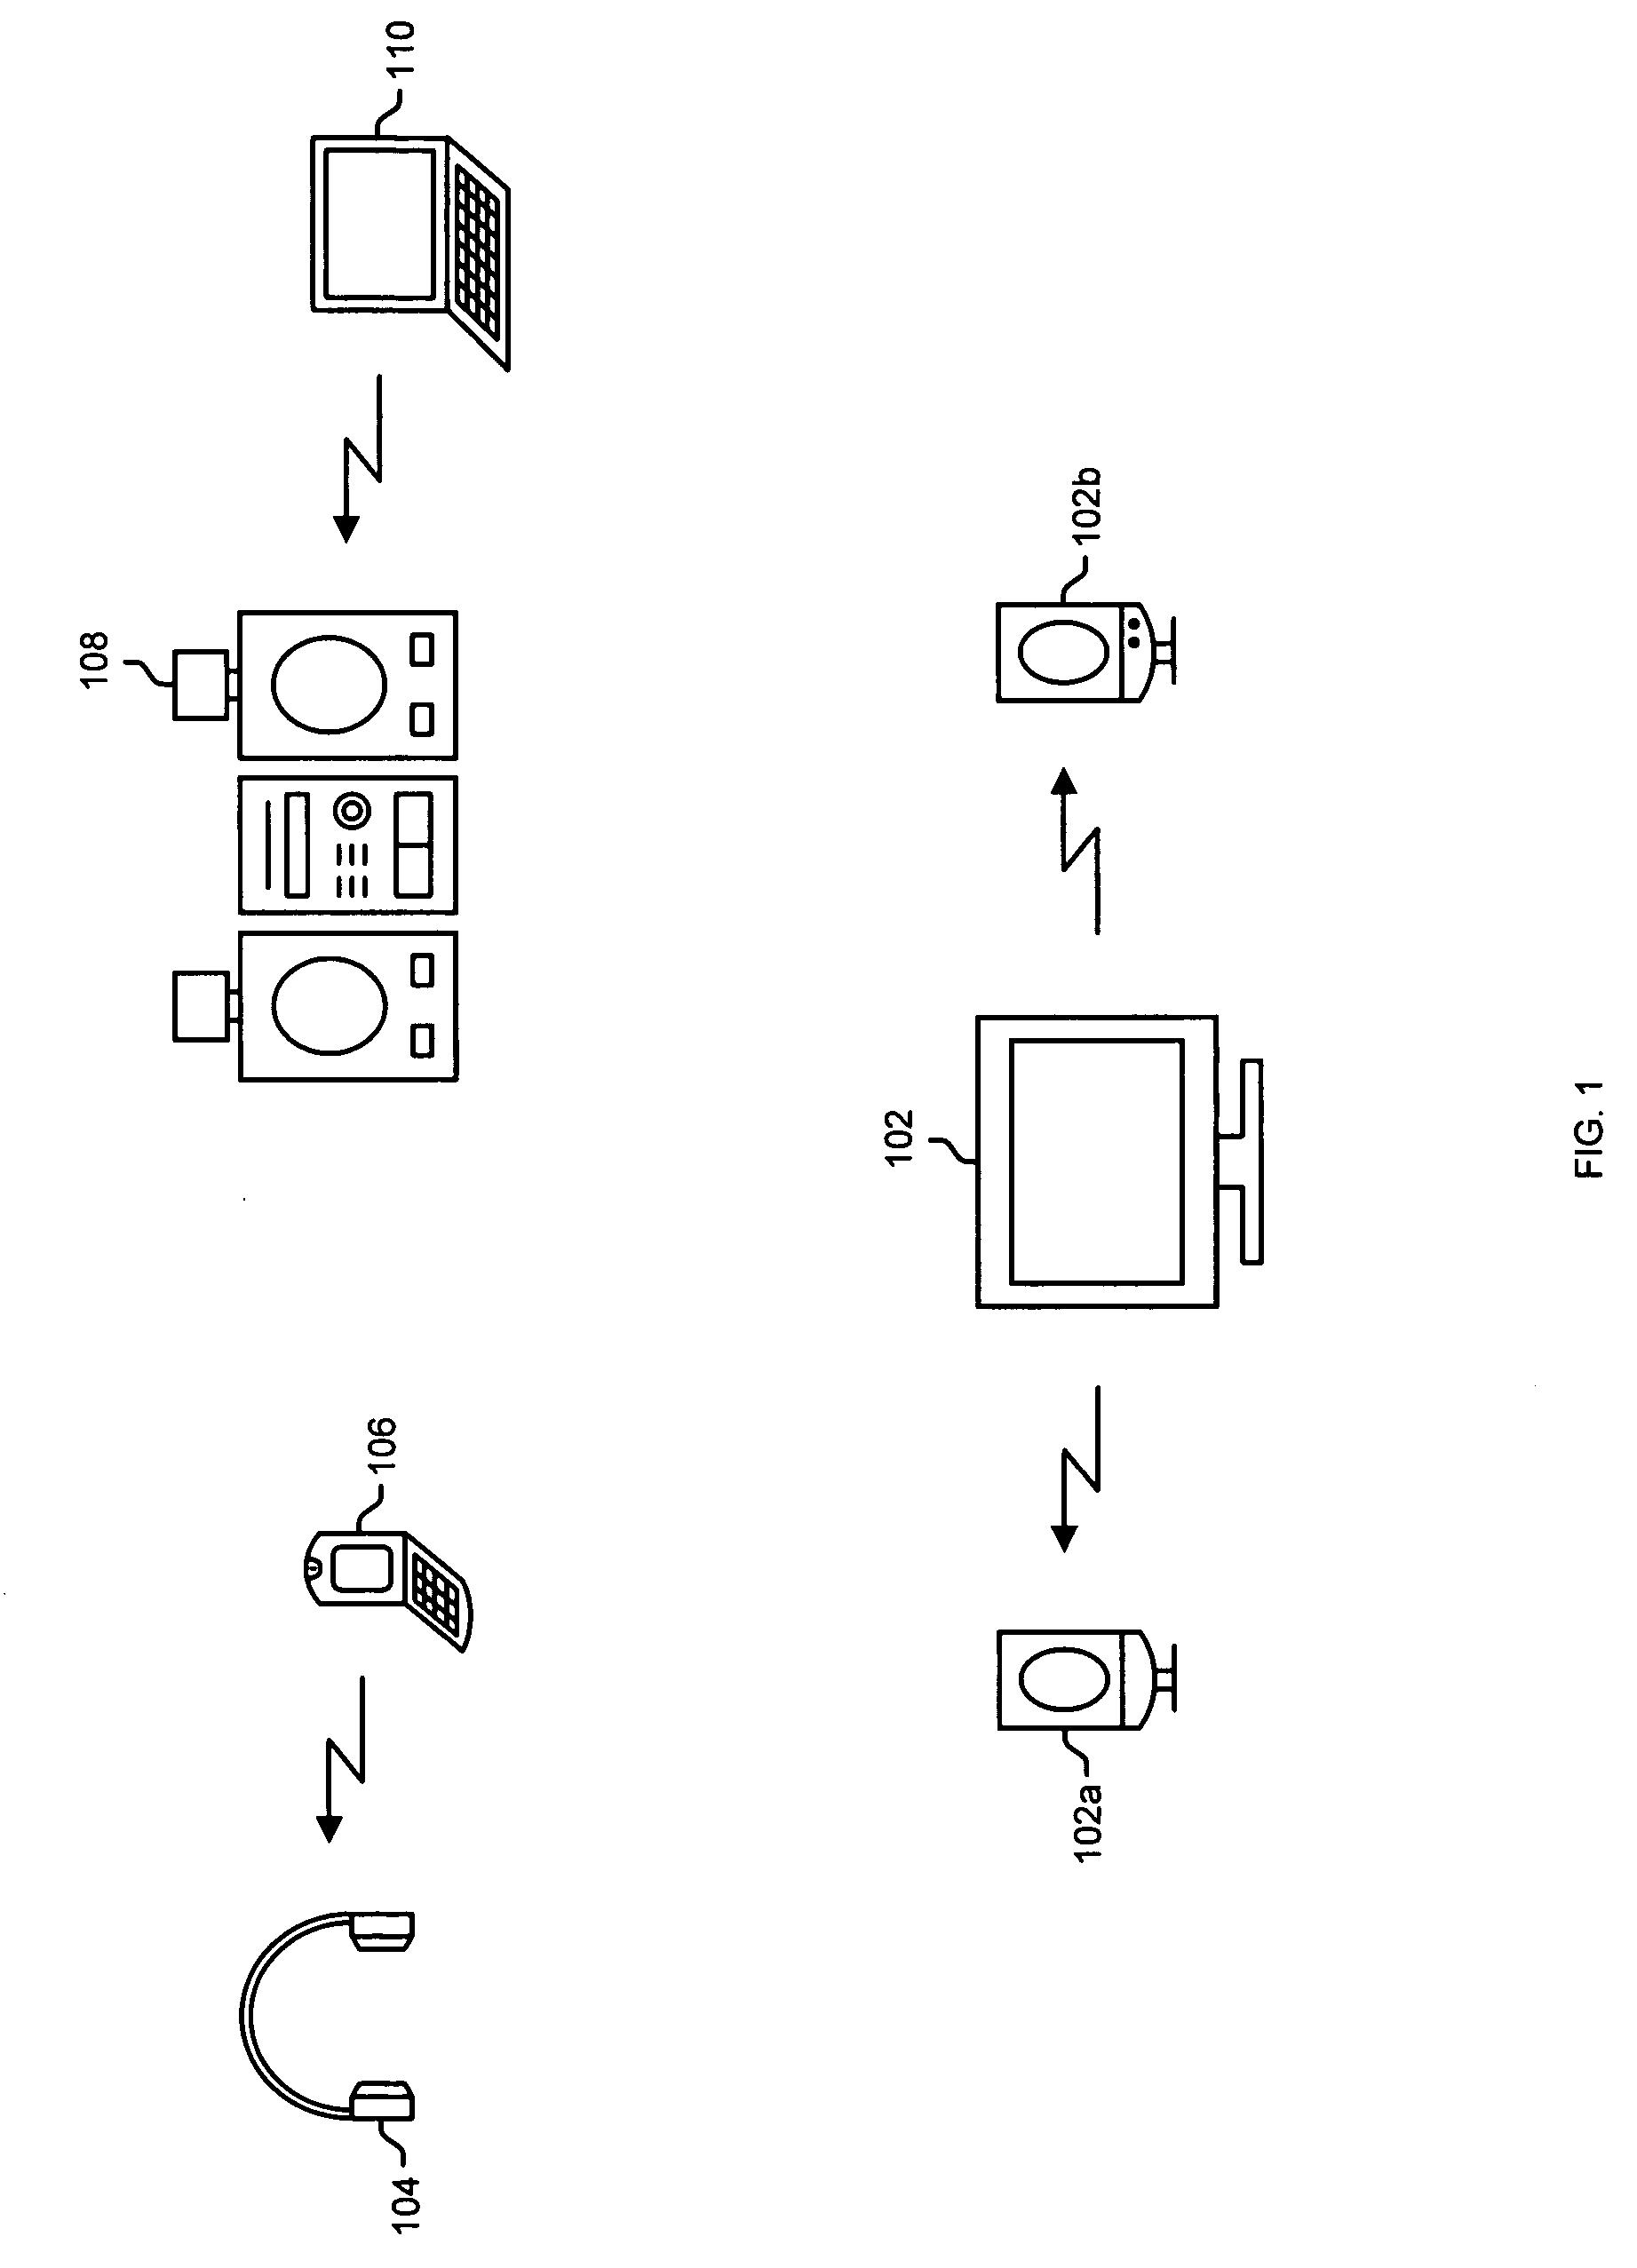 Method and system for optimized architecture for bluetooth streaming audio applications